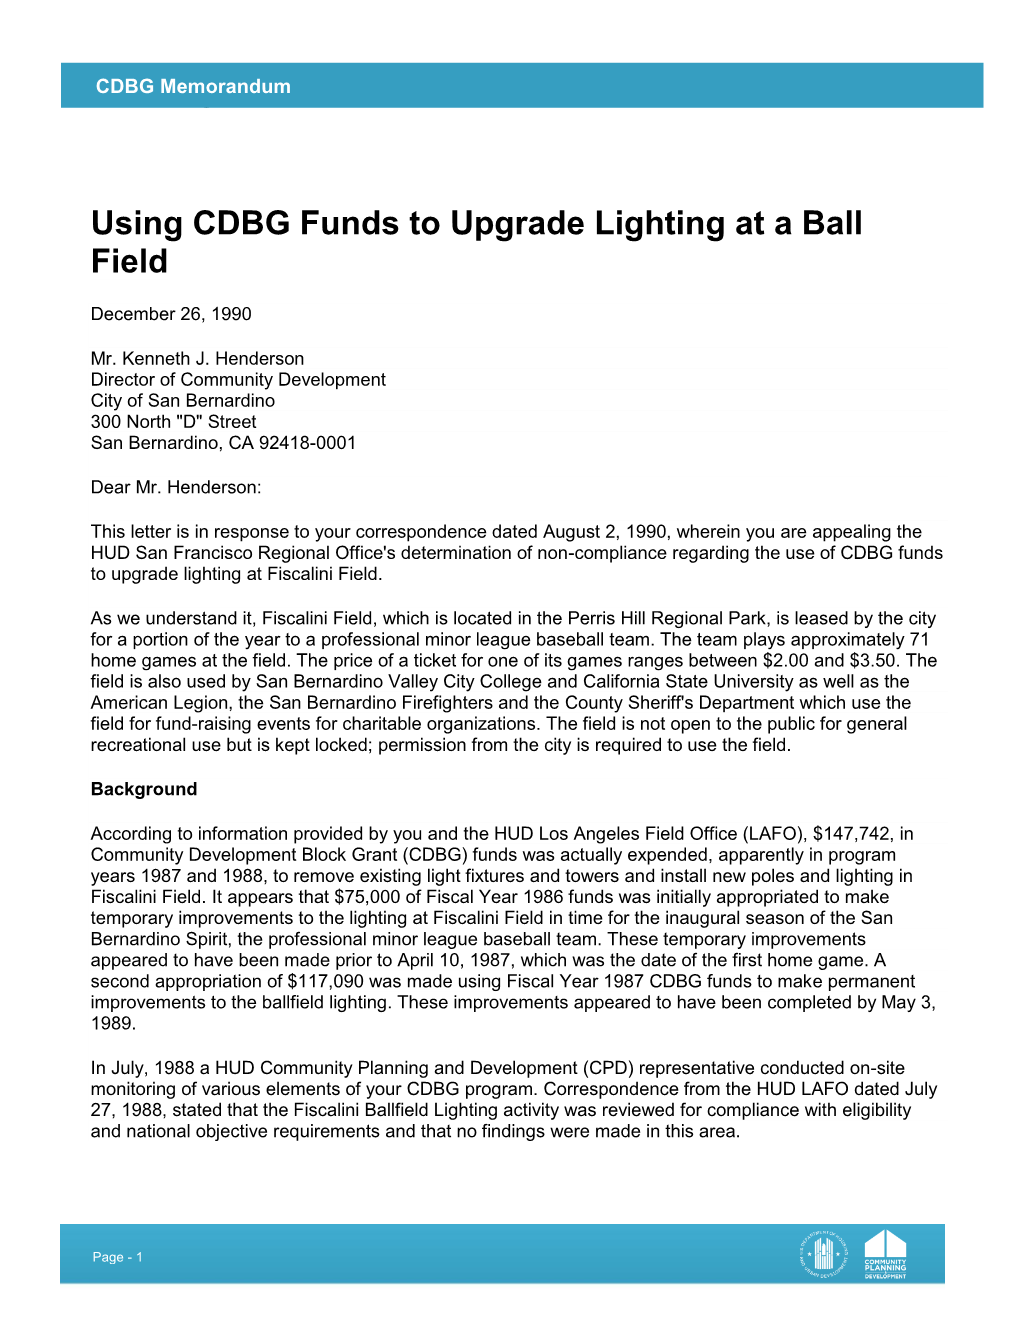 Using CDBG Funds to Upgrade Lighting at a Ball Field